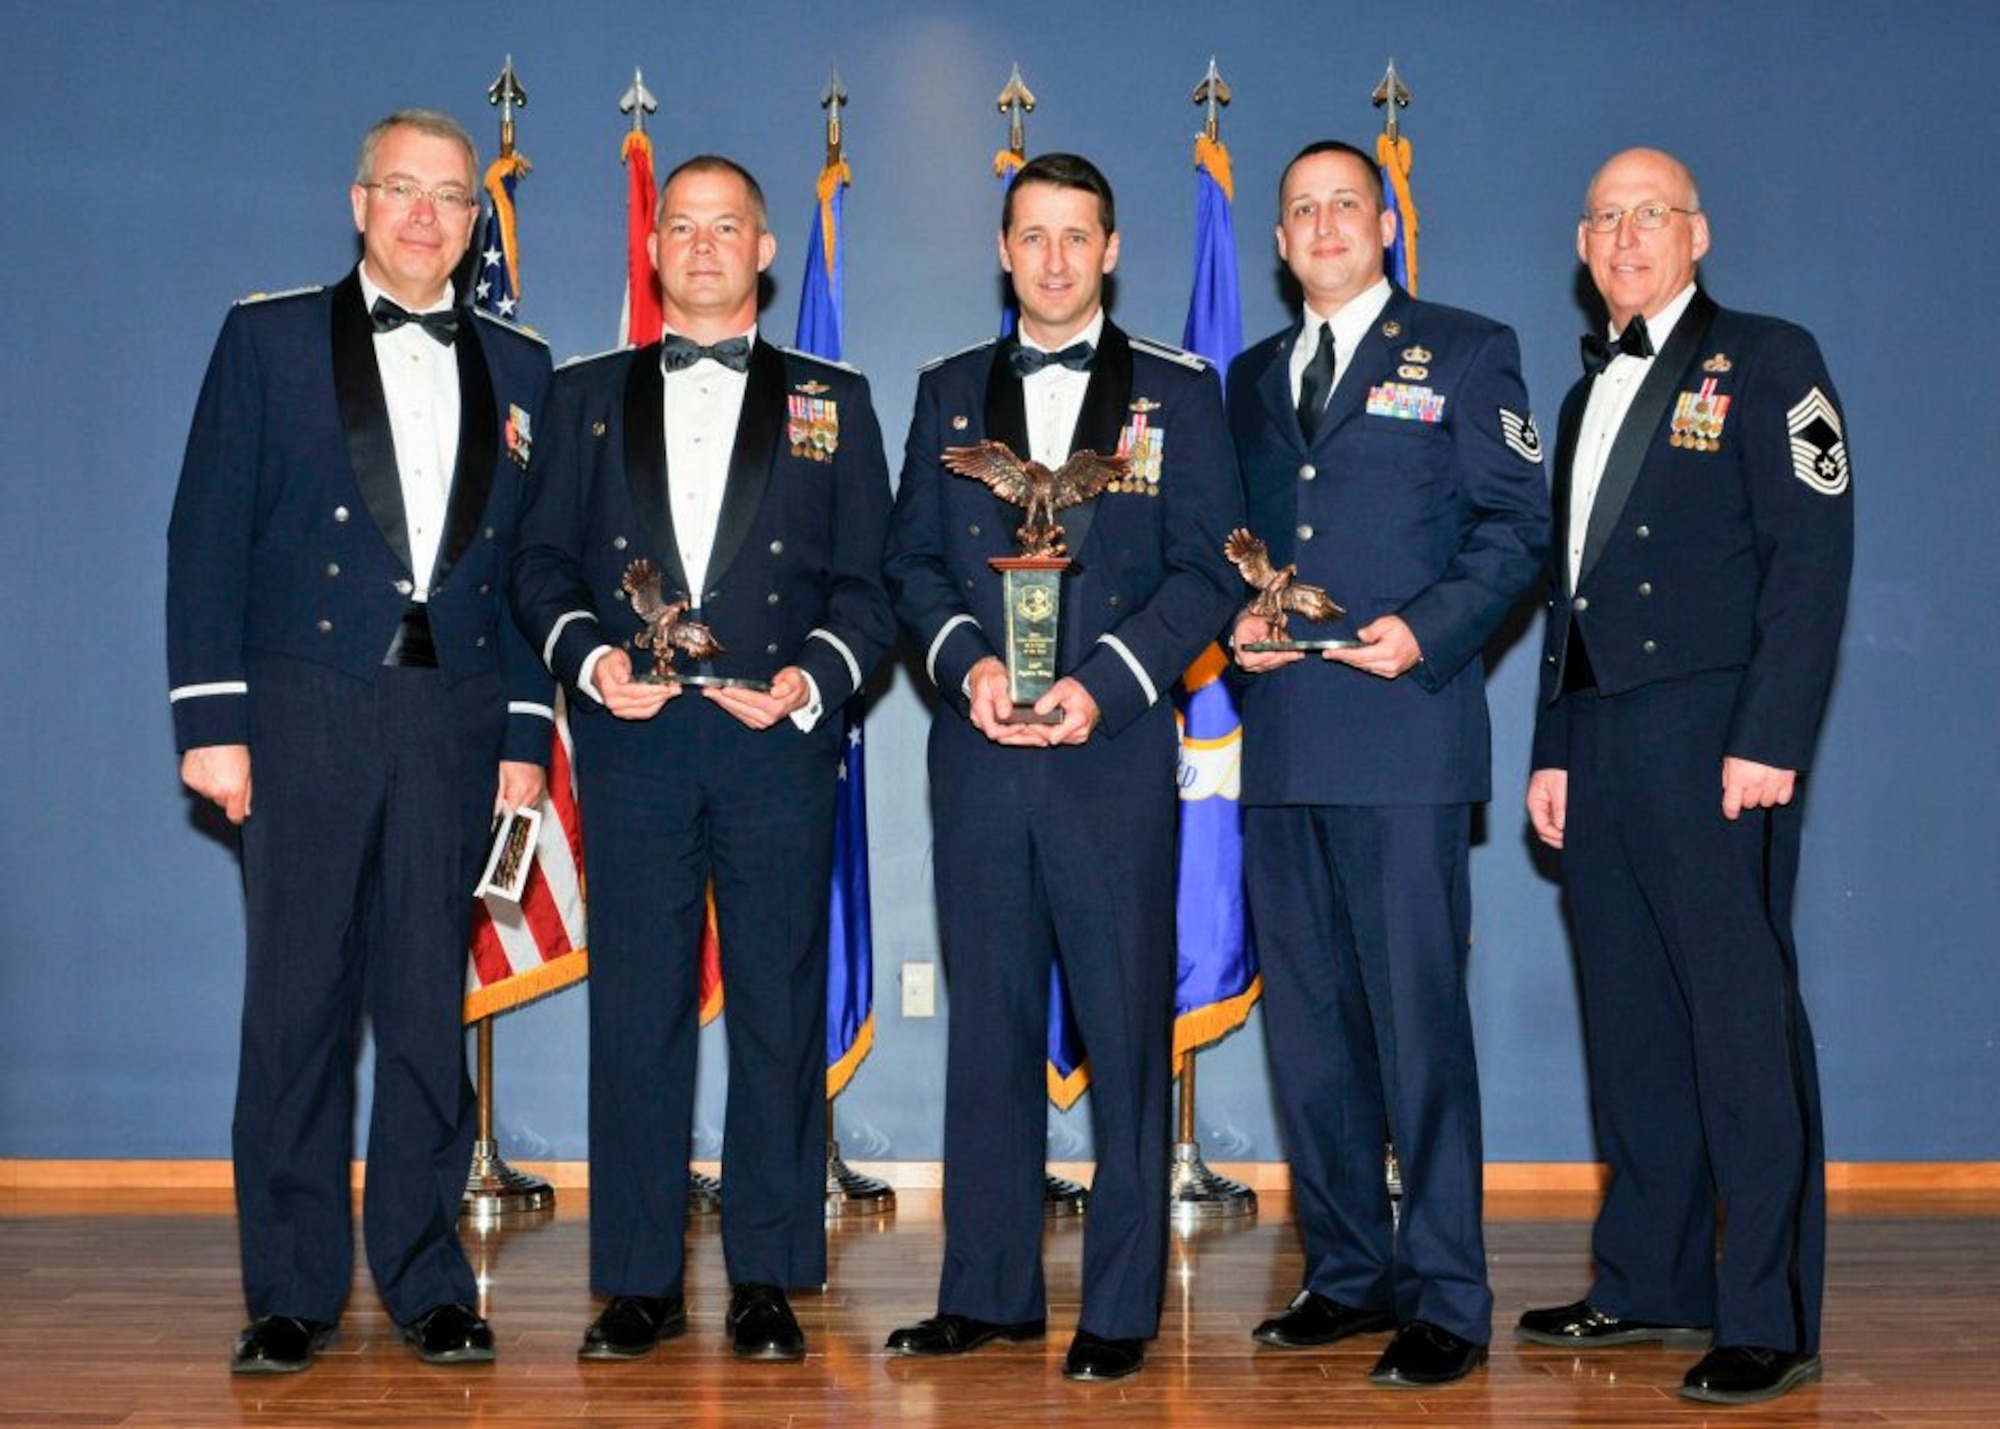 From left to right: Maj. Gary Bentley, wing executive officer; Lt. Col. Tim Moses, operations support squadron commander; Col. Steve Nordhaus, wing commander; Tech. Sgt. Bruce Hedrick, command post controller and Chief Master Sgt. Scott Boyer, Aerospace Control Alert chief of enlisted maintenance.